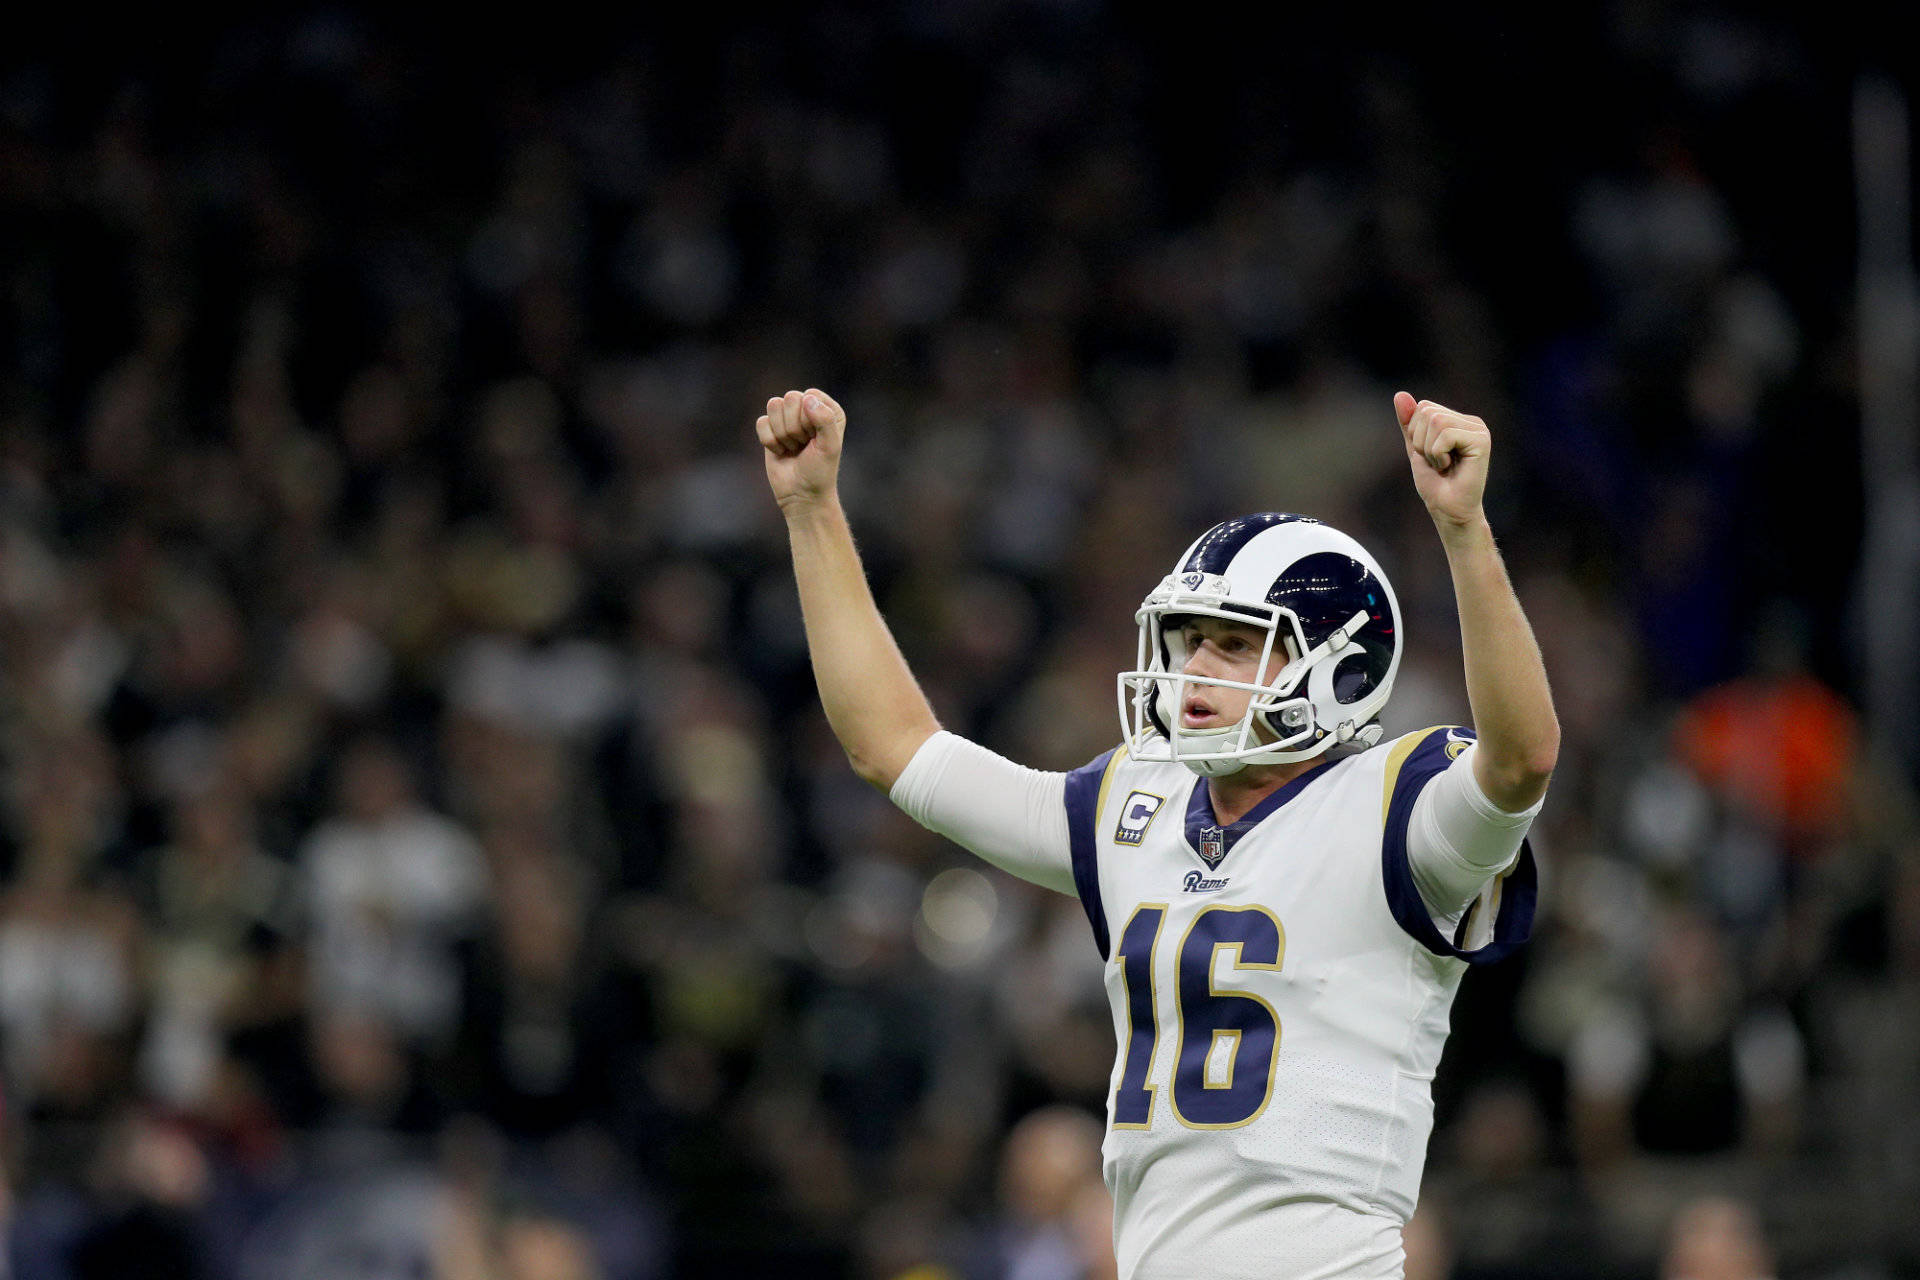 Jared Goff of the Los Angeles Rams celebrates a pass against the New Orleans Saints during the third quarter in the NFC Championship game at the Mercedes-Benz Superdome on January 20, 2019 in New Orleans, Louisiana.
 Jonathan Bachman/Getty Images